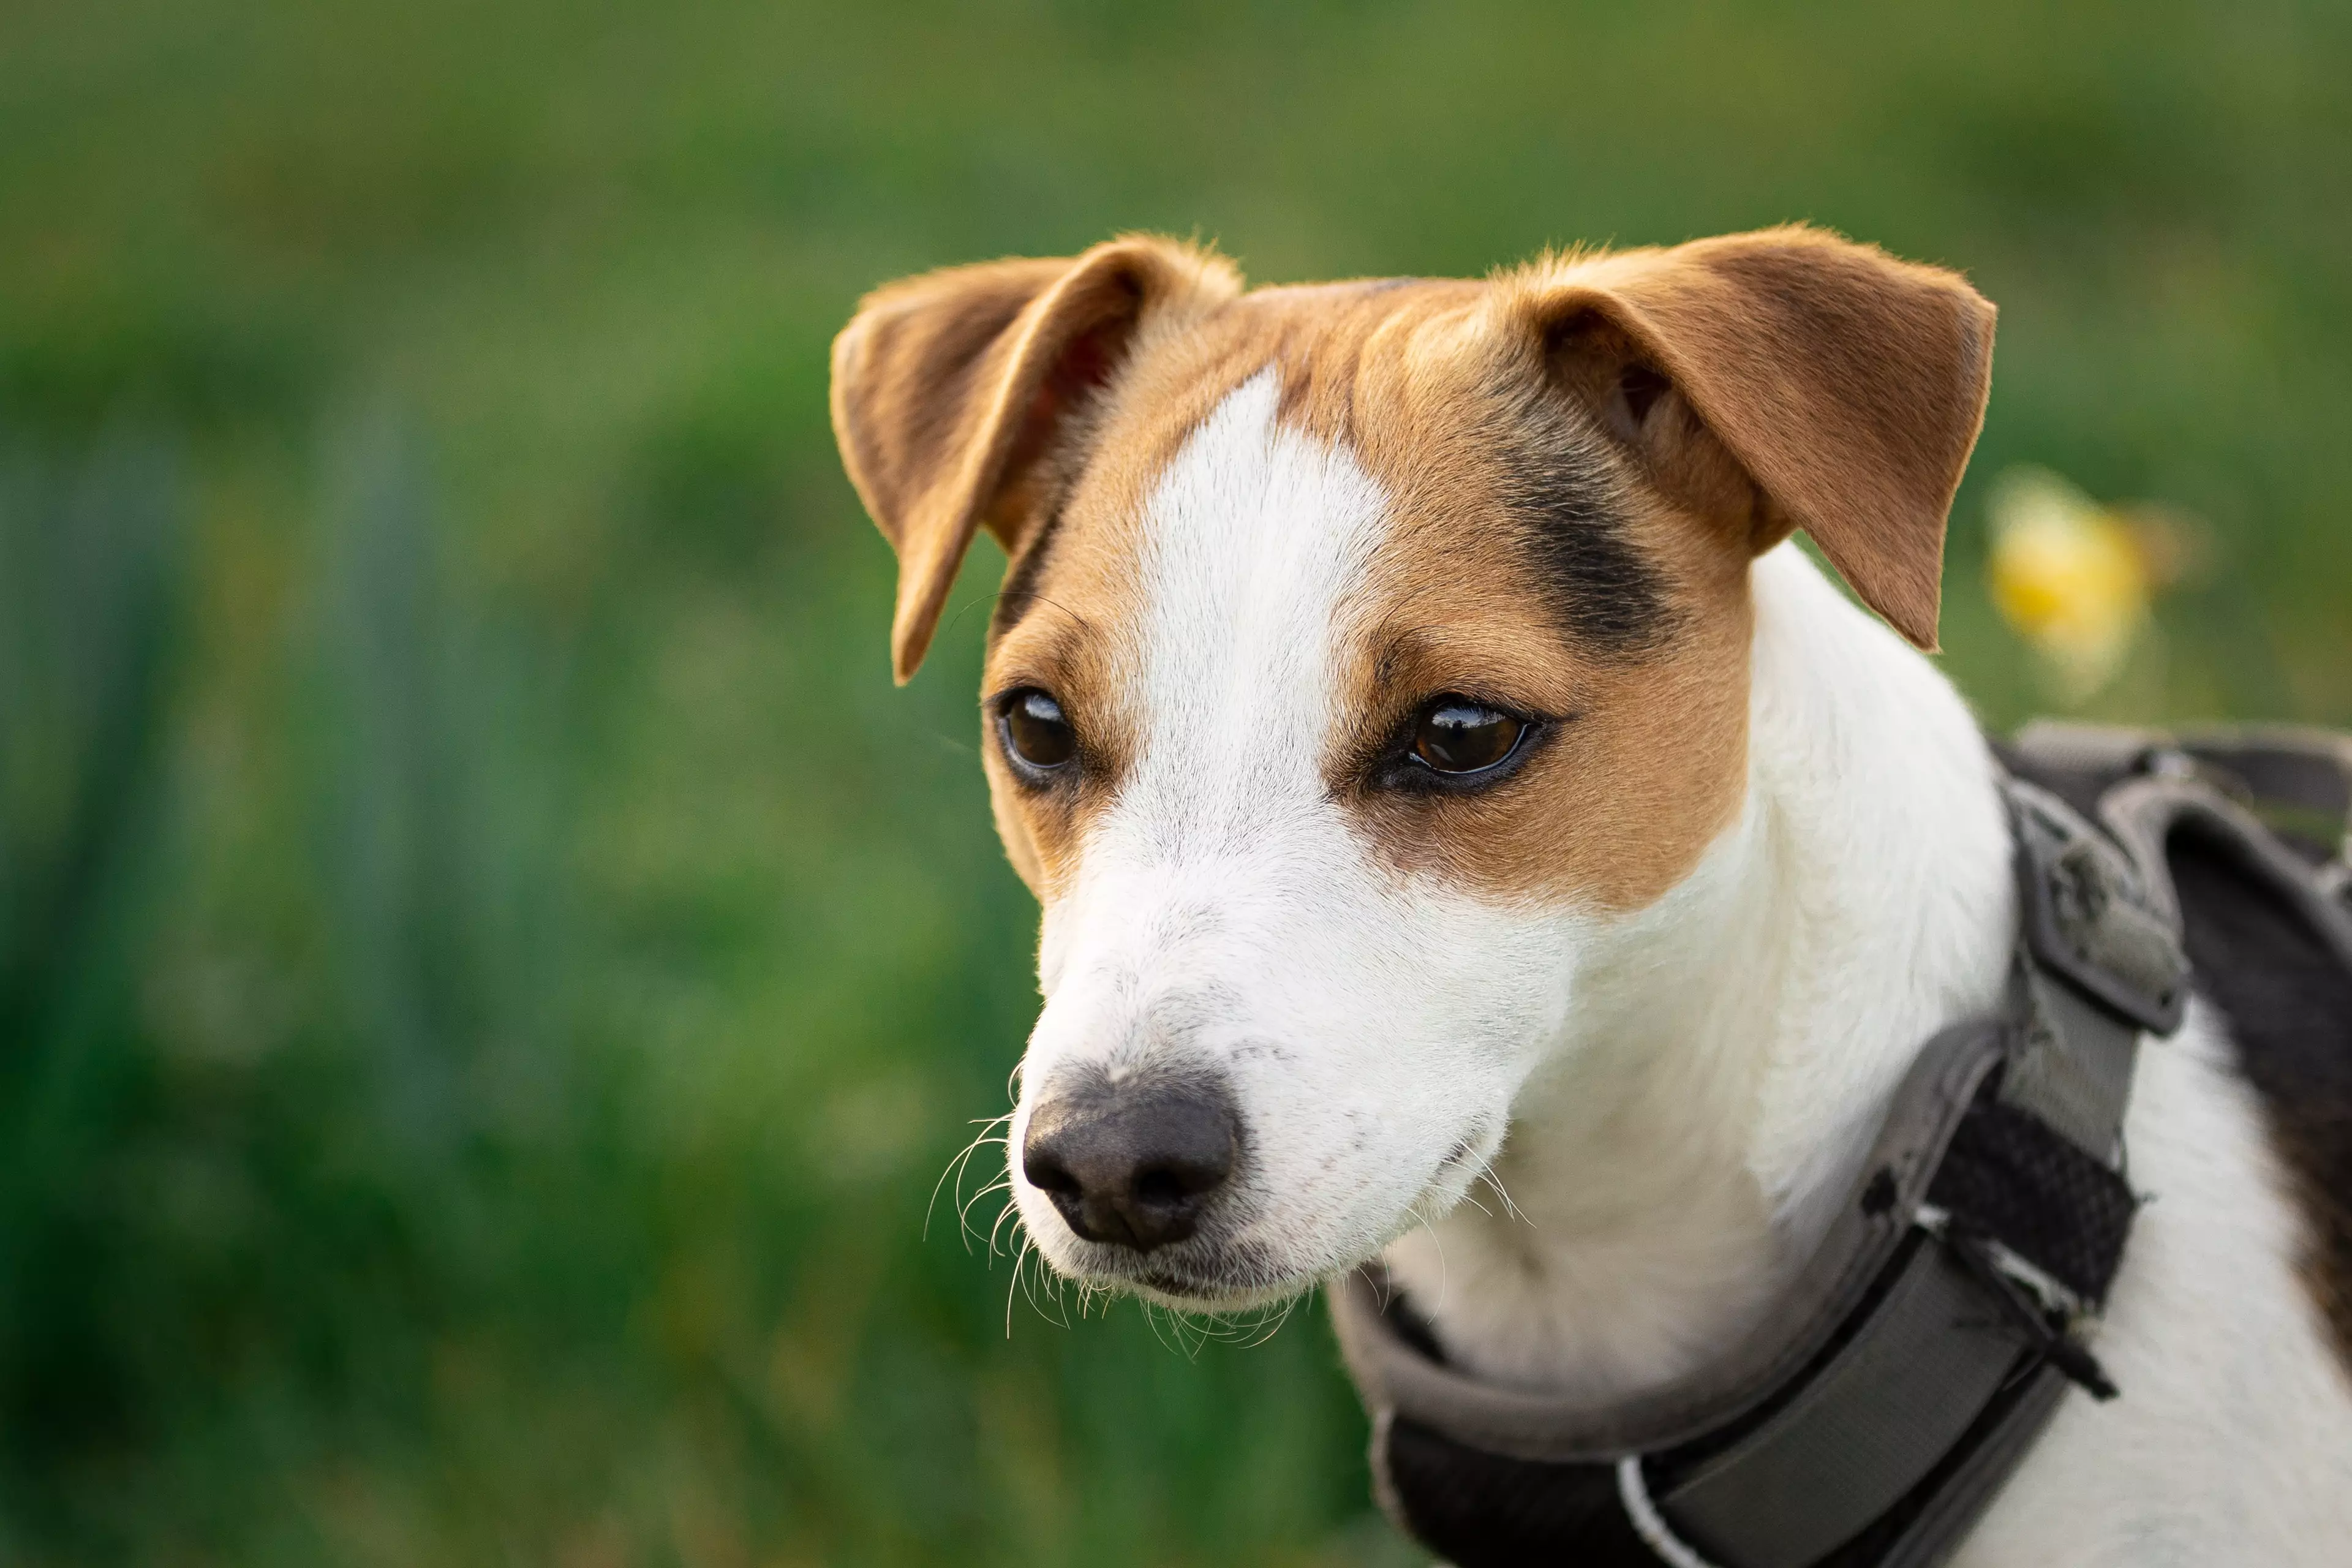 Jack Russell terriers have become one of the most in demand breeds among 'dognappers' (